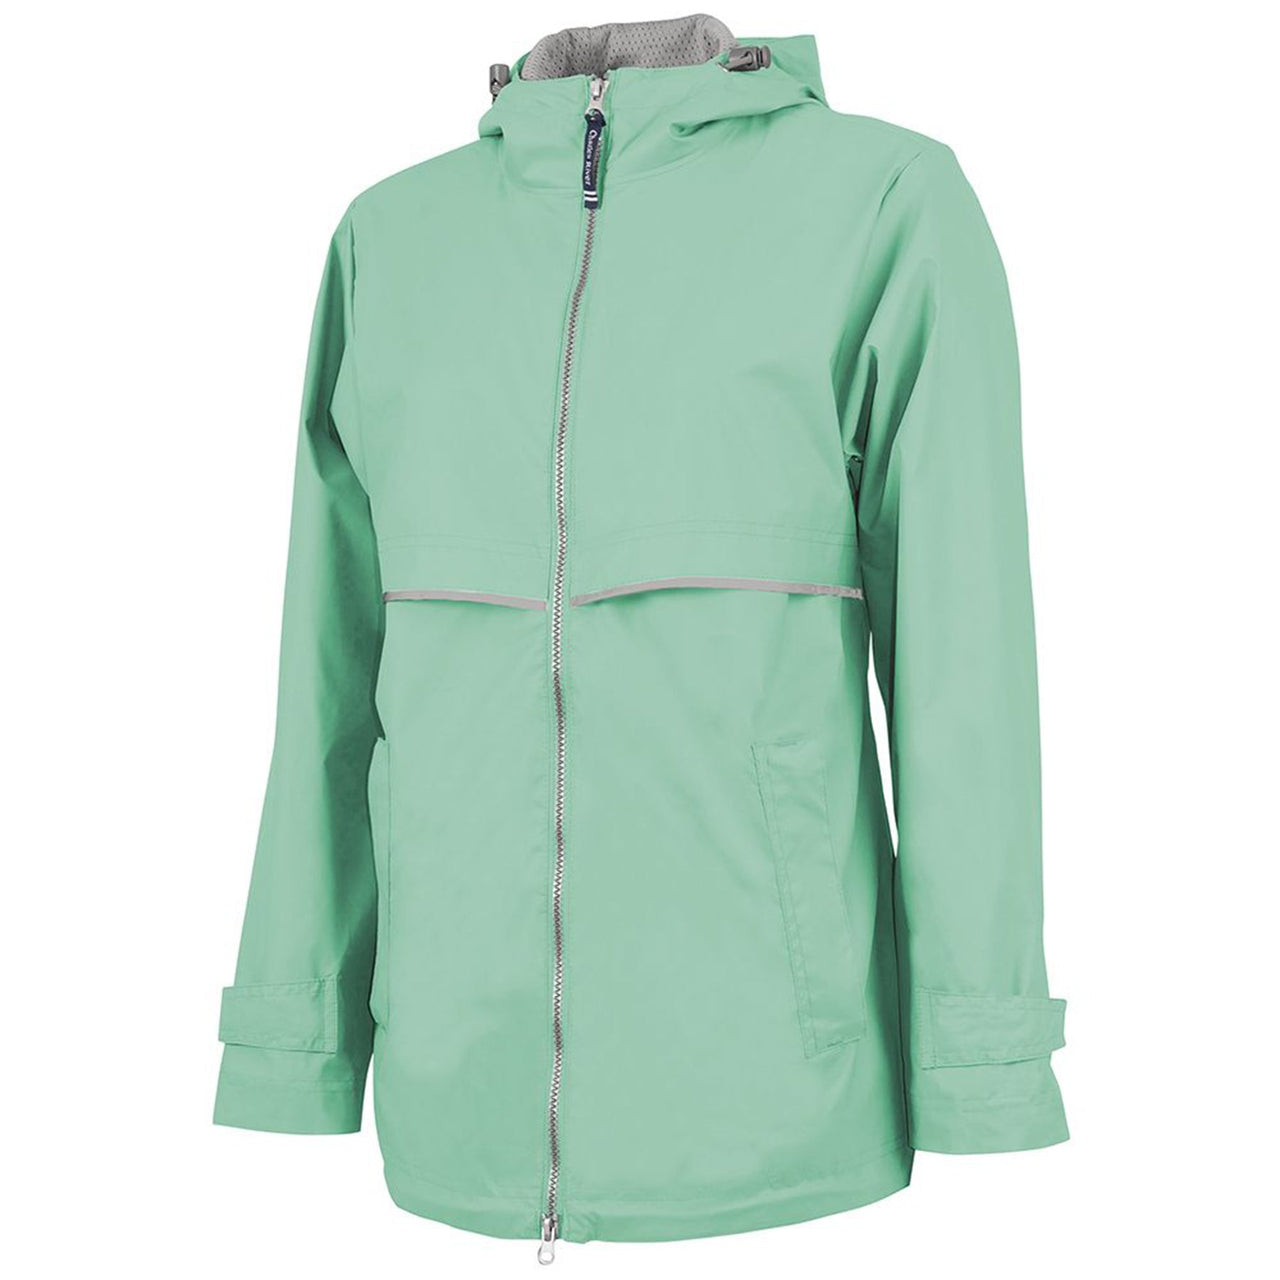 the front of the women's reflective mint zip-up windbreaker is a reflective zipper